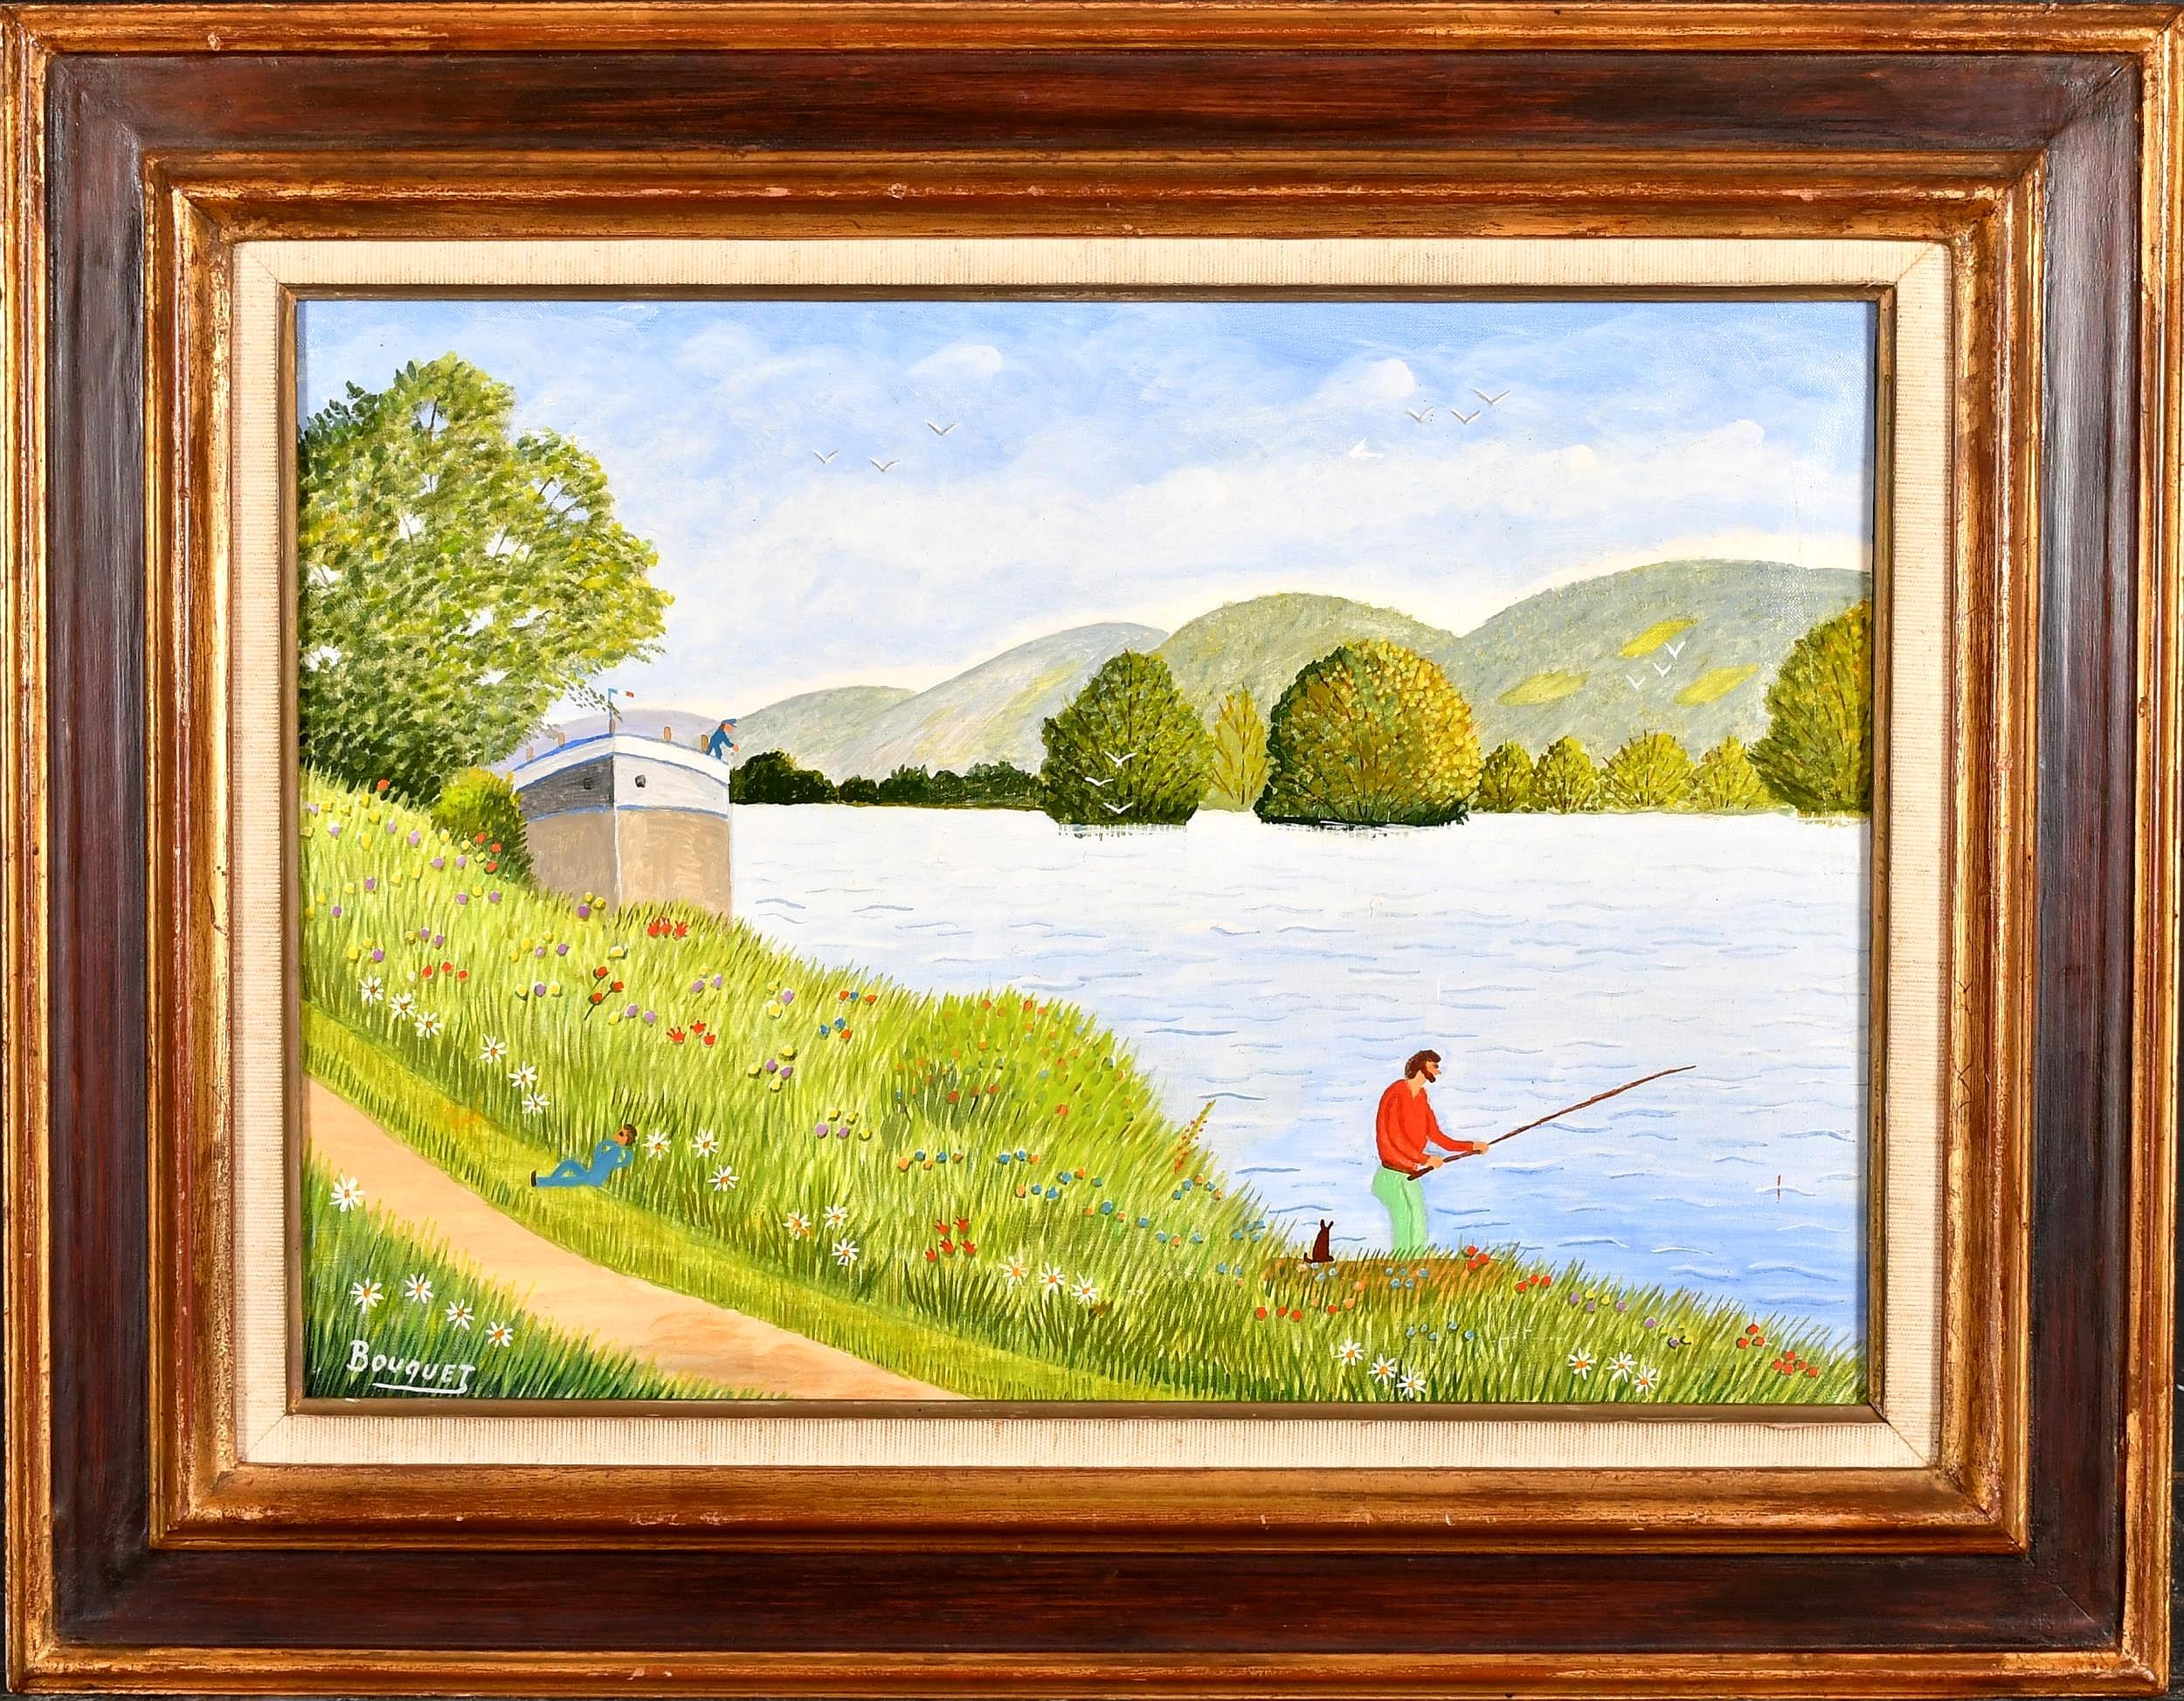 André Bouquet. Landscape Painting - Fisherman on a Riverbank - Mid 20th Century French Naif Landscape Oil Painting